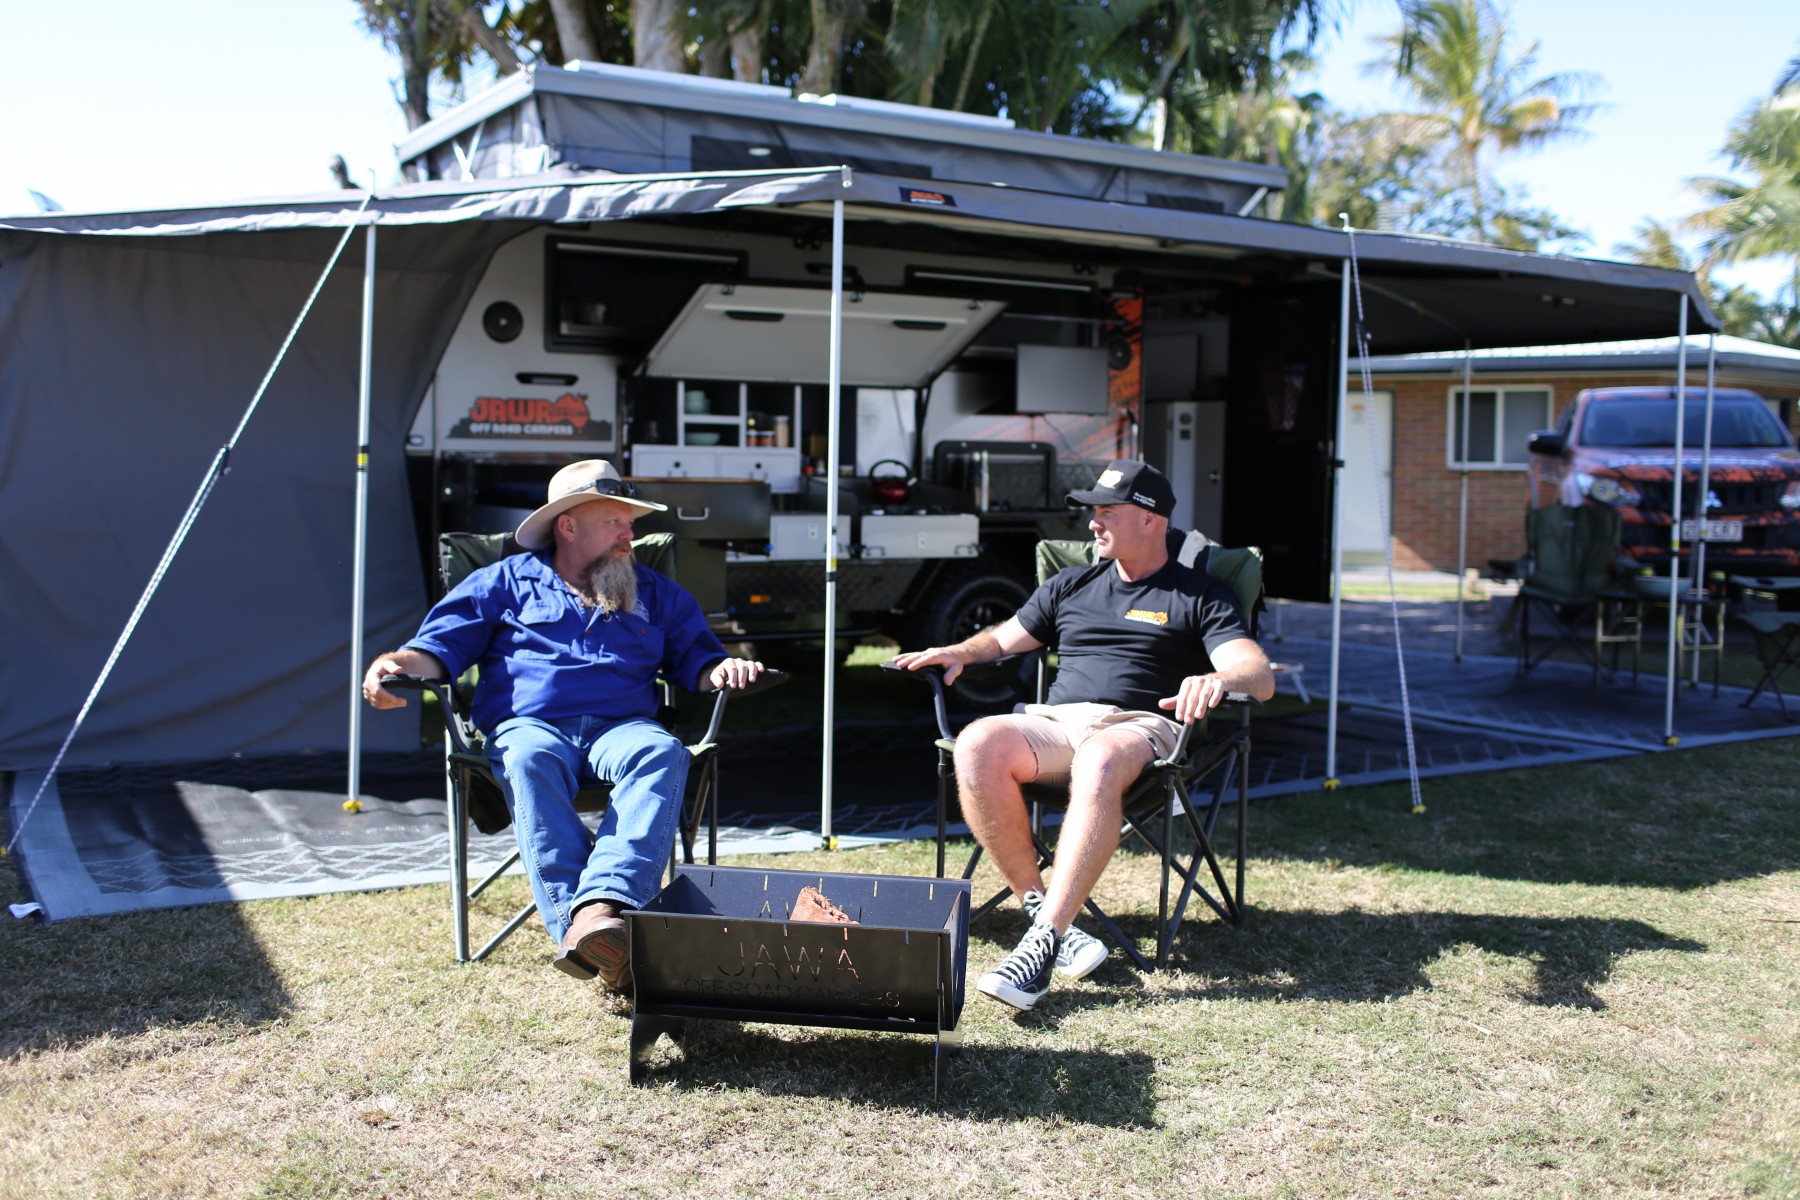 Jawa Sirocco fully set up at campsite with alfresco kitchen and external storage on hybrid caravan. Two men are sitting in front of the caravan in a park with a Jawa Off Road Camper Trailers fire pit. All are on sale in Sunshine Coast Queensland.